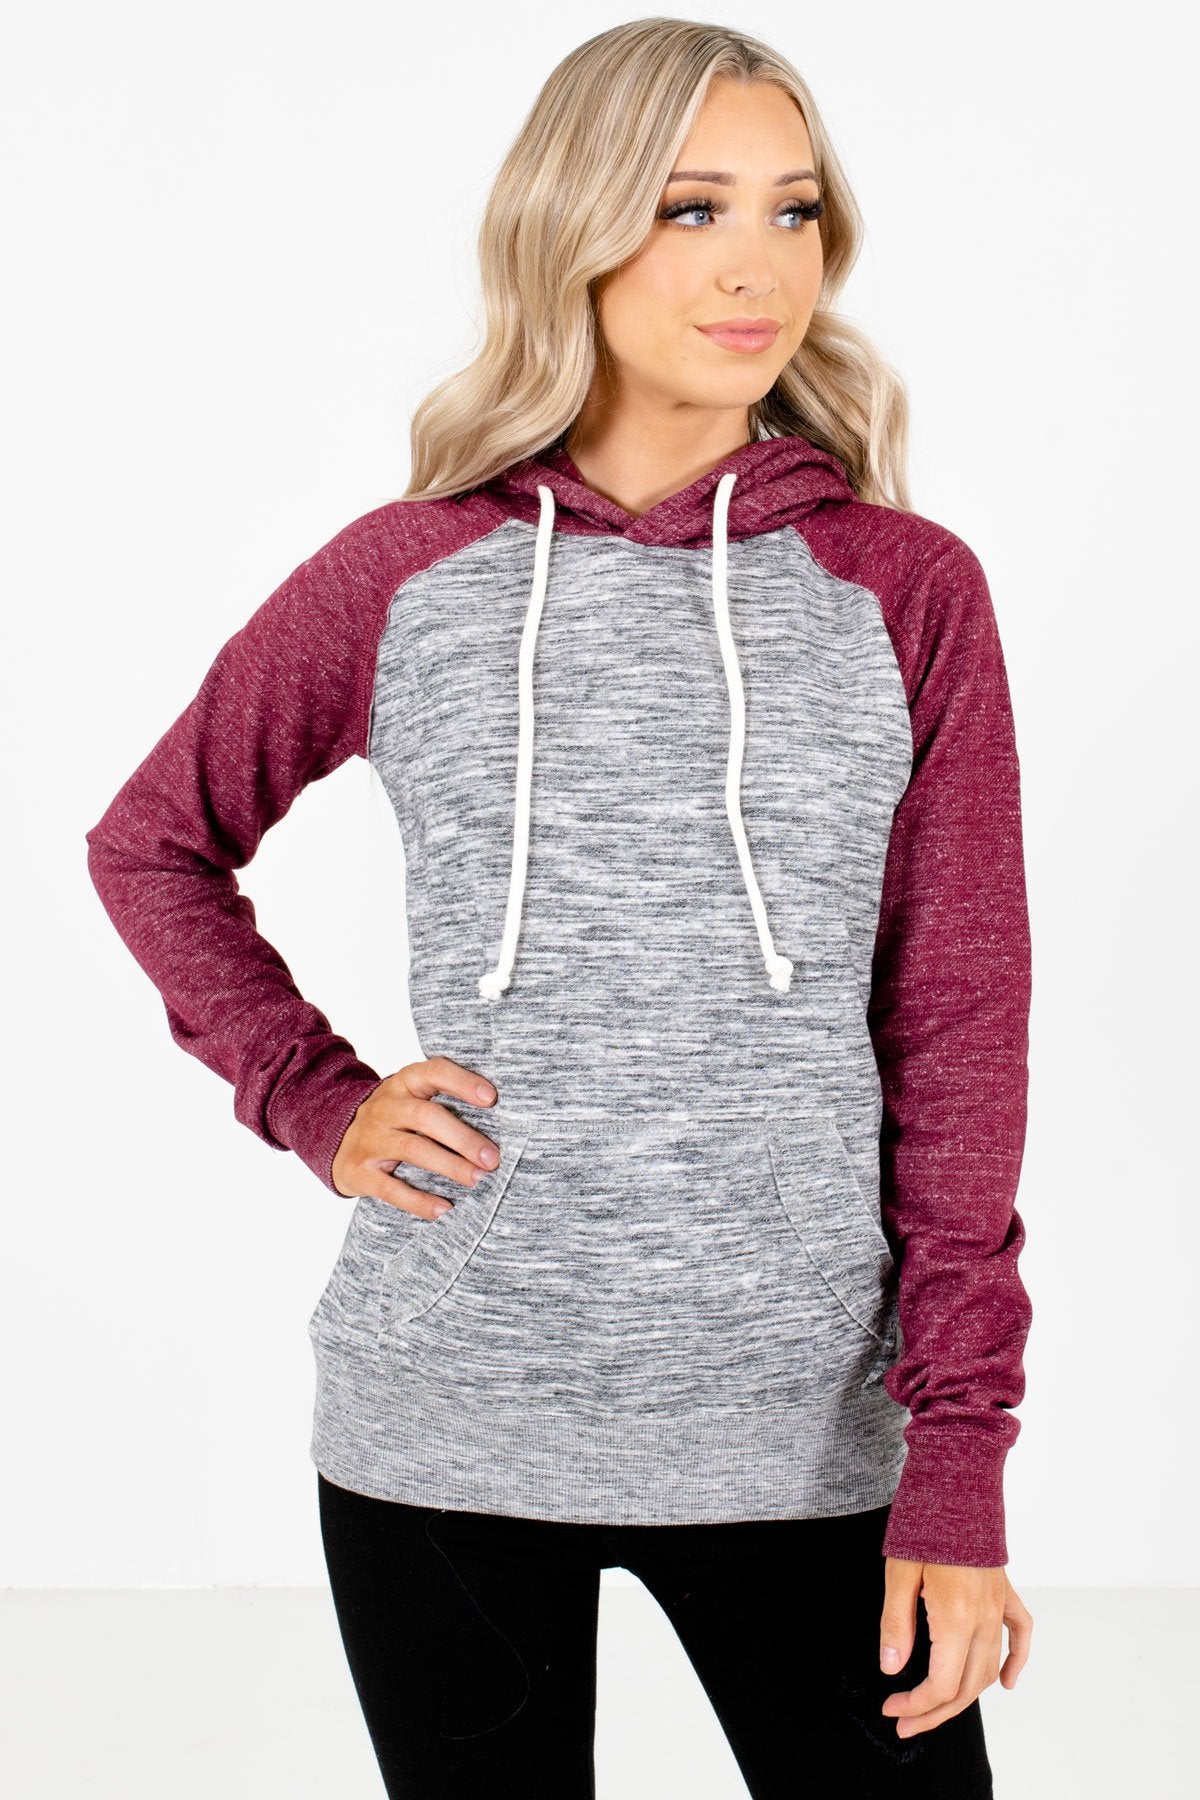 Burgundy and Gray High-Quality Boutique Hoodies for Women